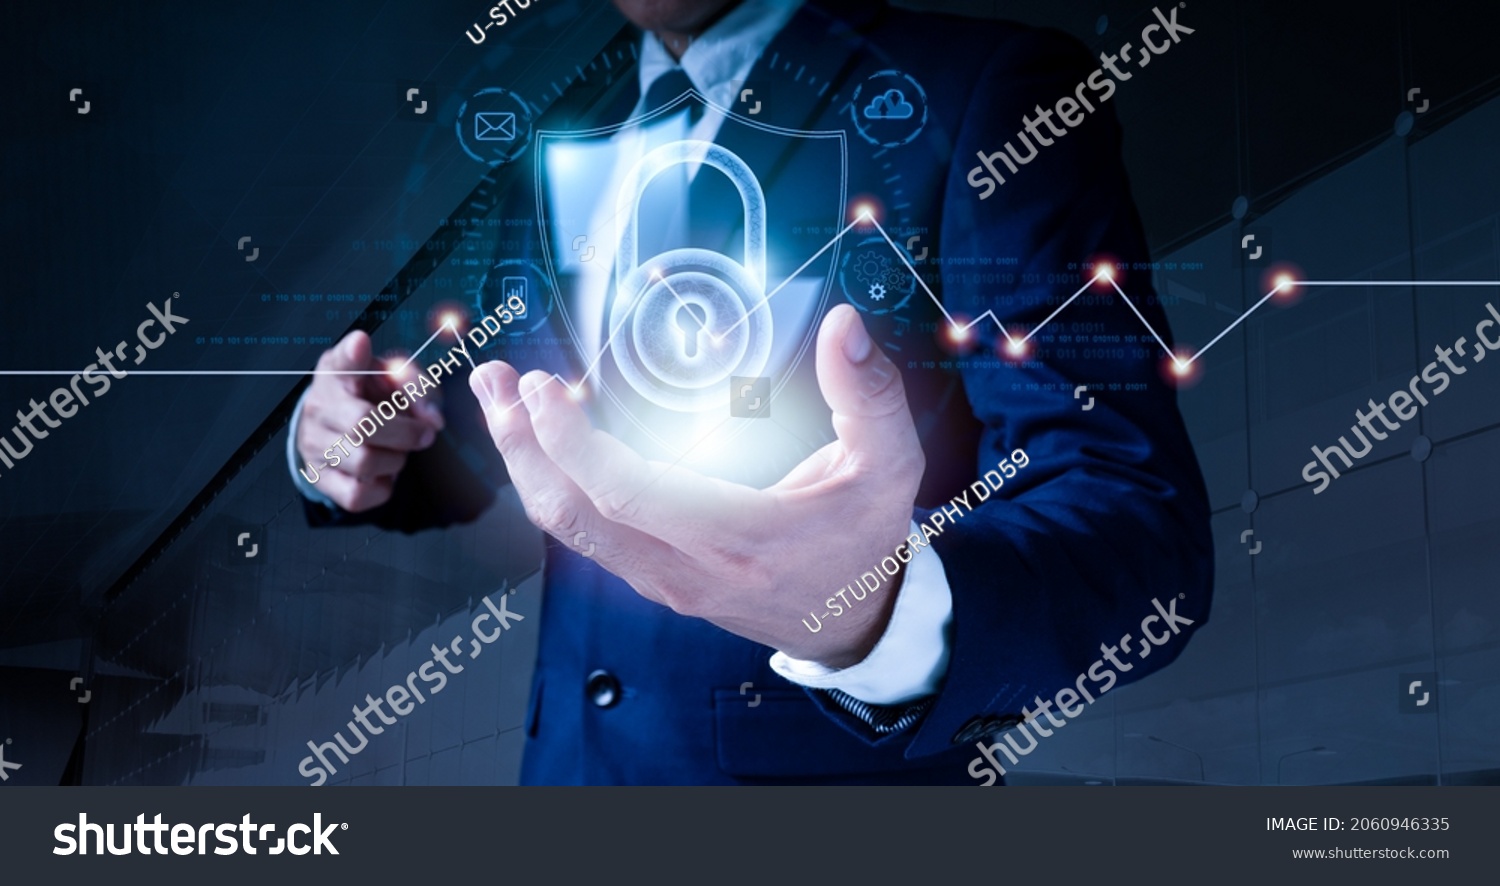 Data protection and cyber security. A padlock is used by a businessman to secure commercial and financial data over a virtual network connection. Innovative technology produce brilliant solutions. #2060946335